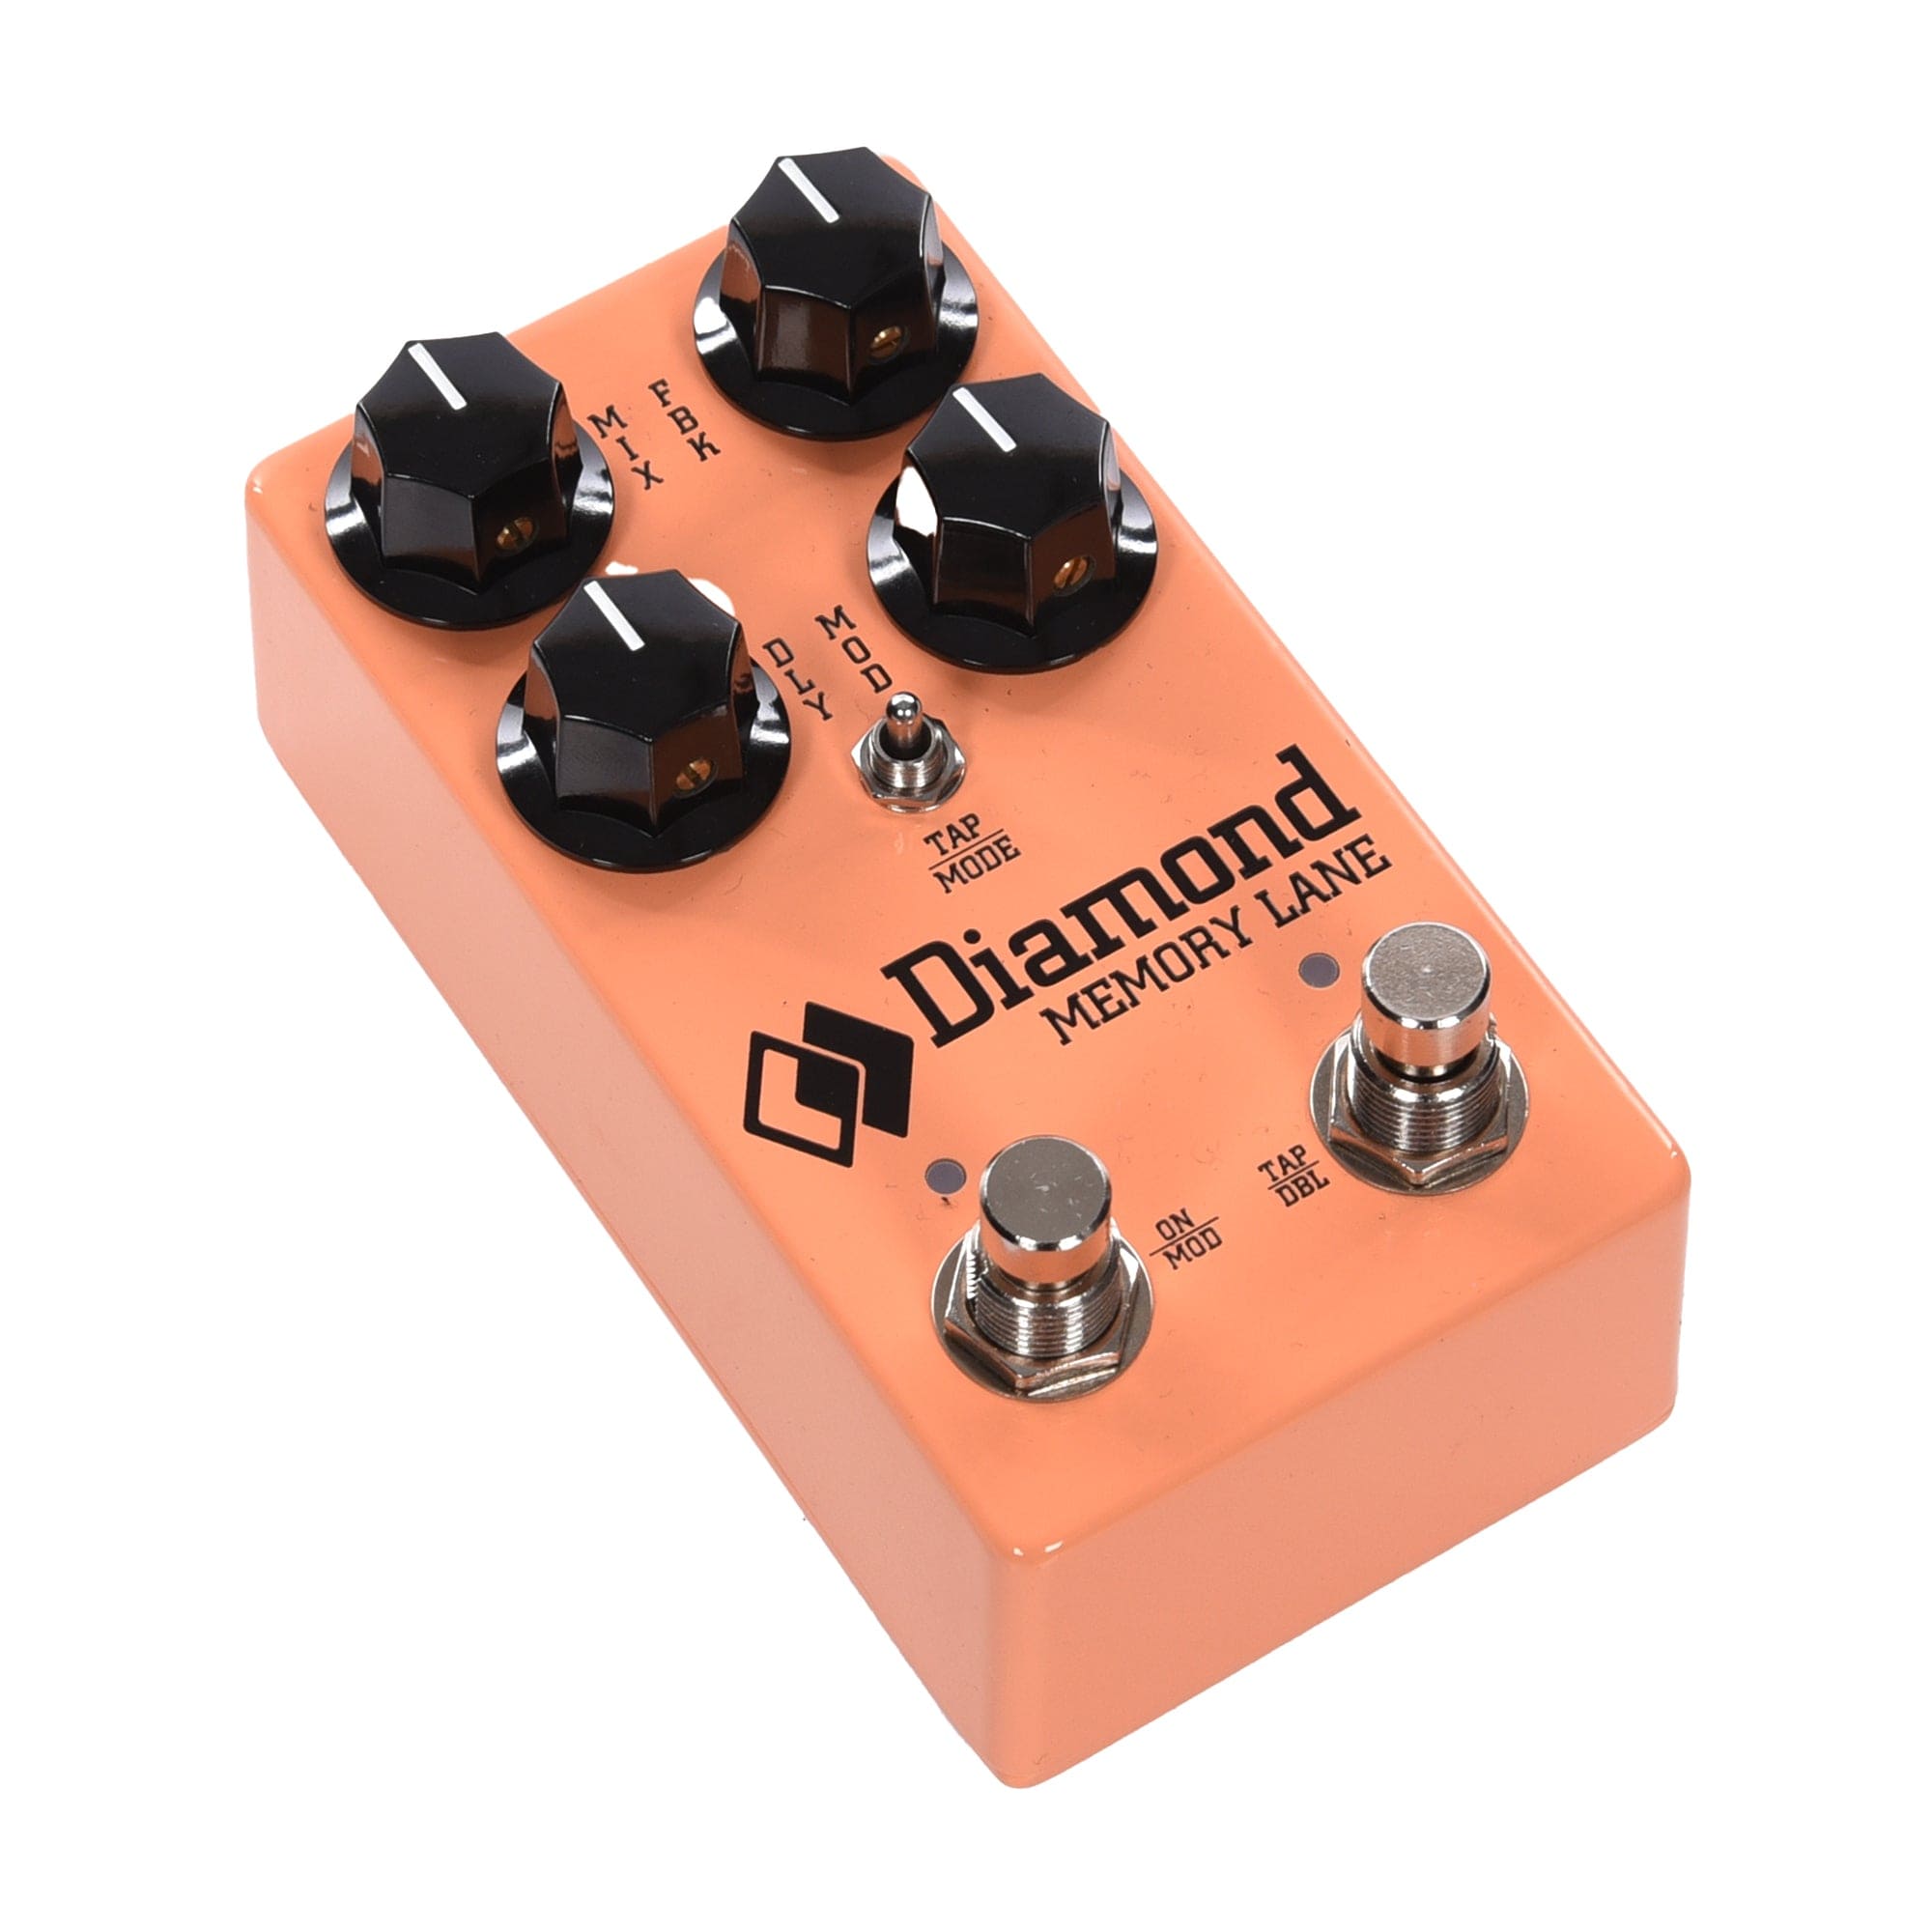 Diamond Pedals Memory Lane Delay Pedal Pacific Peach Effects and Pedals / Delay